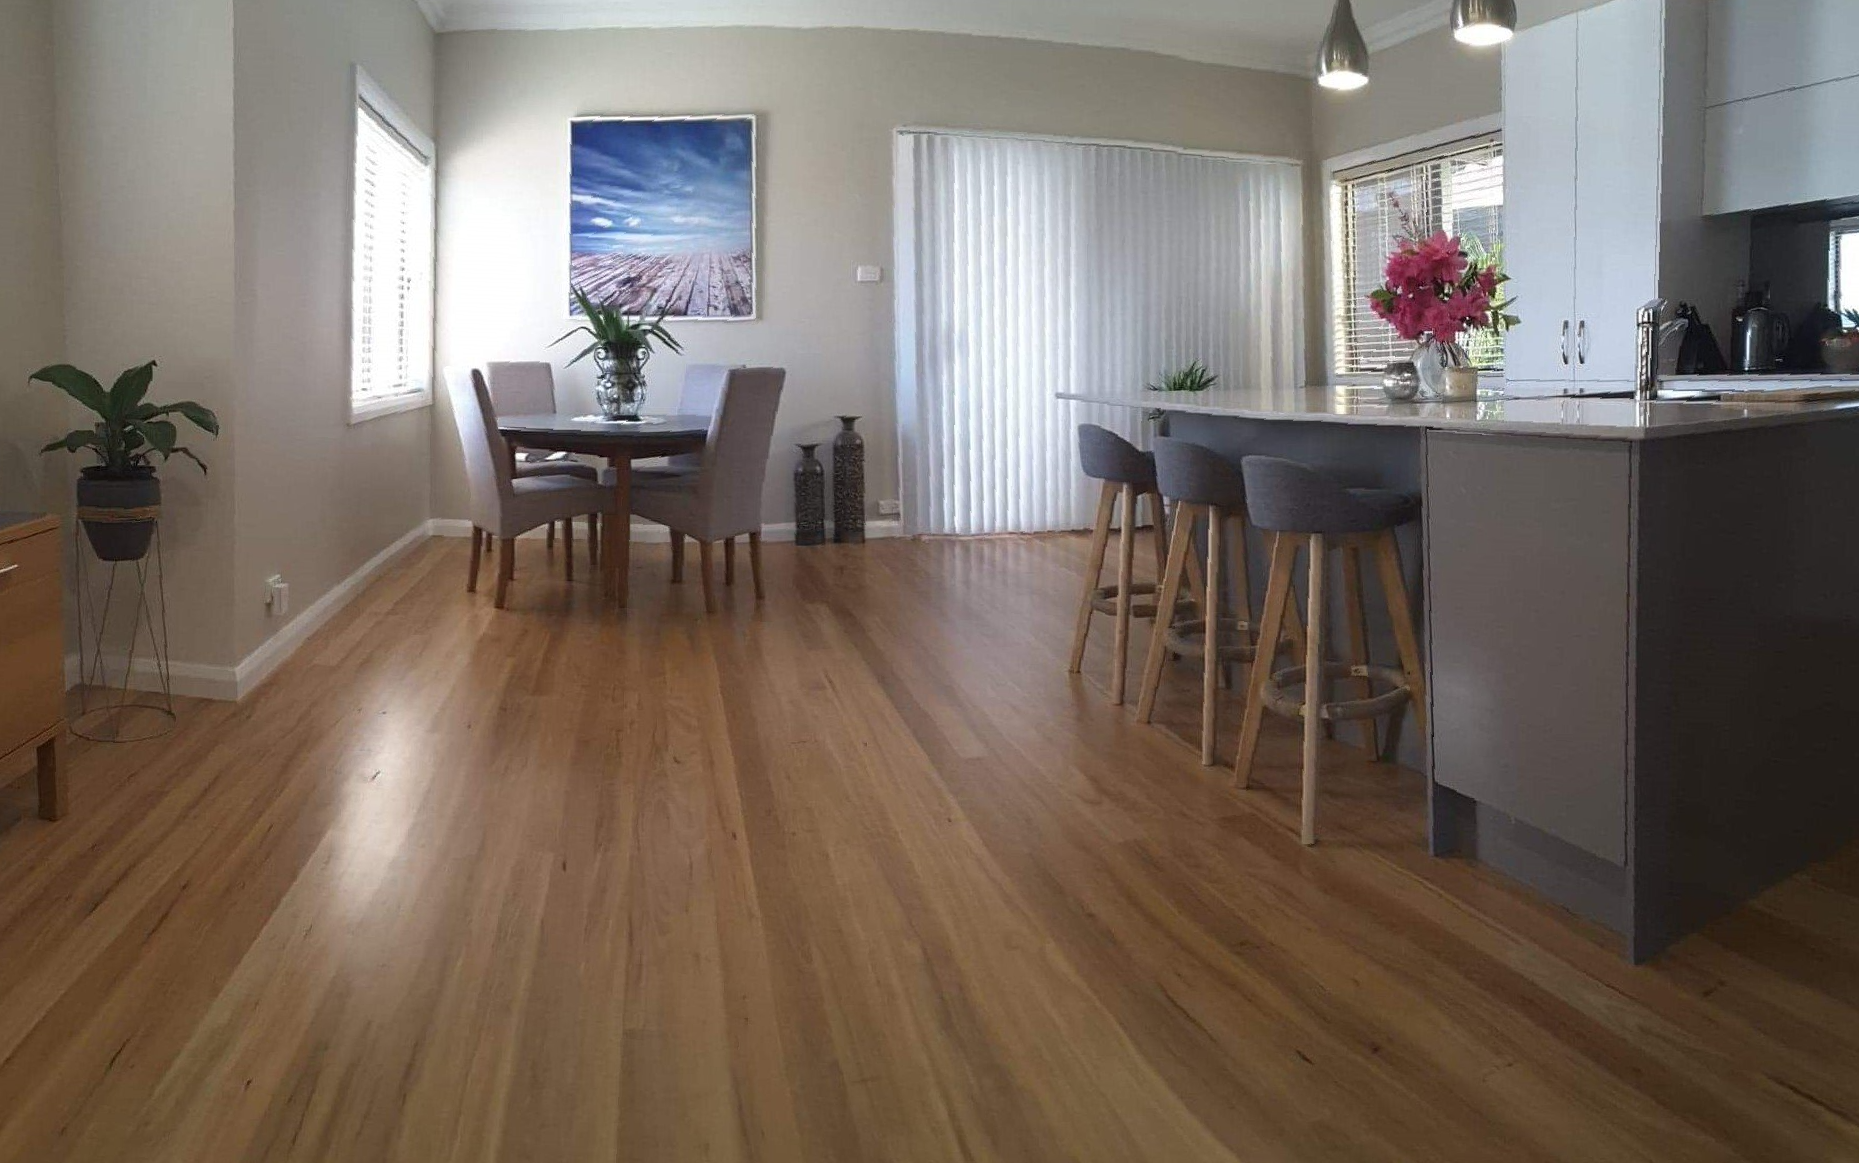 Worker Measuring Timber Floor — WJM Timber Floors In Newcastle, NSW